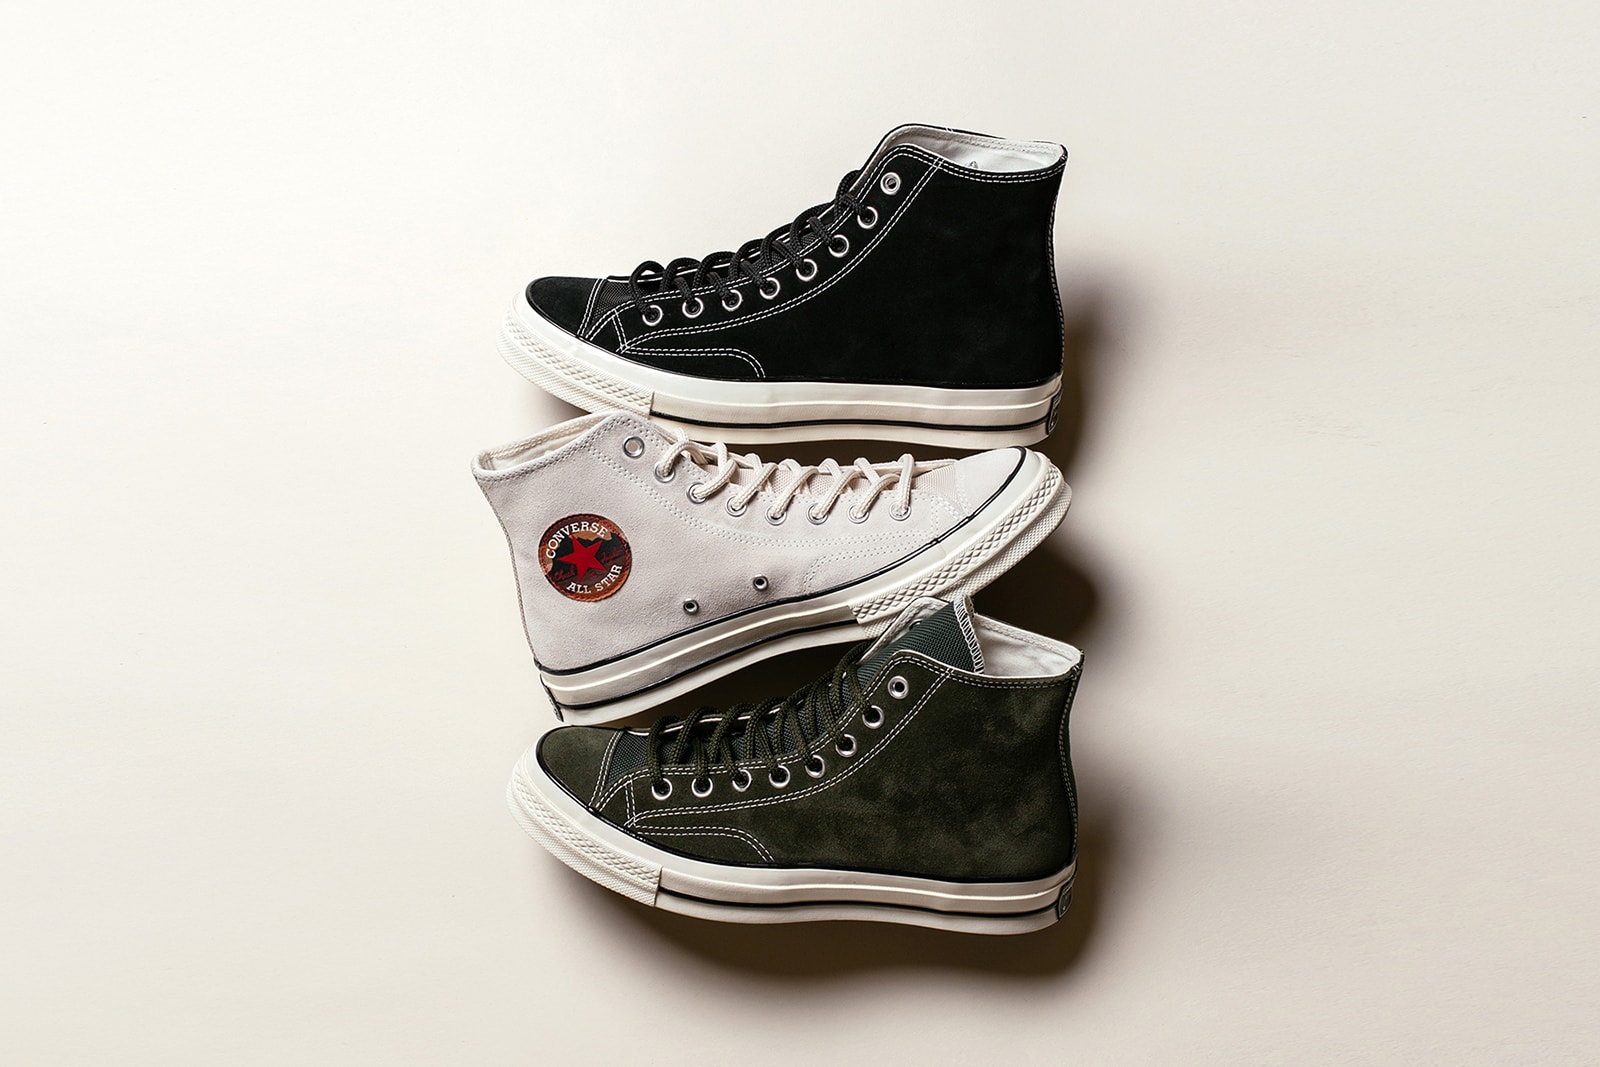 Converse Chuck Taylor All 70 Hi "Suede" Pack |